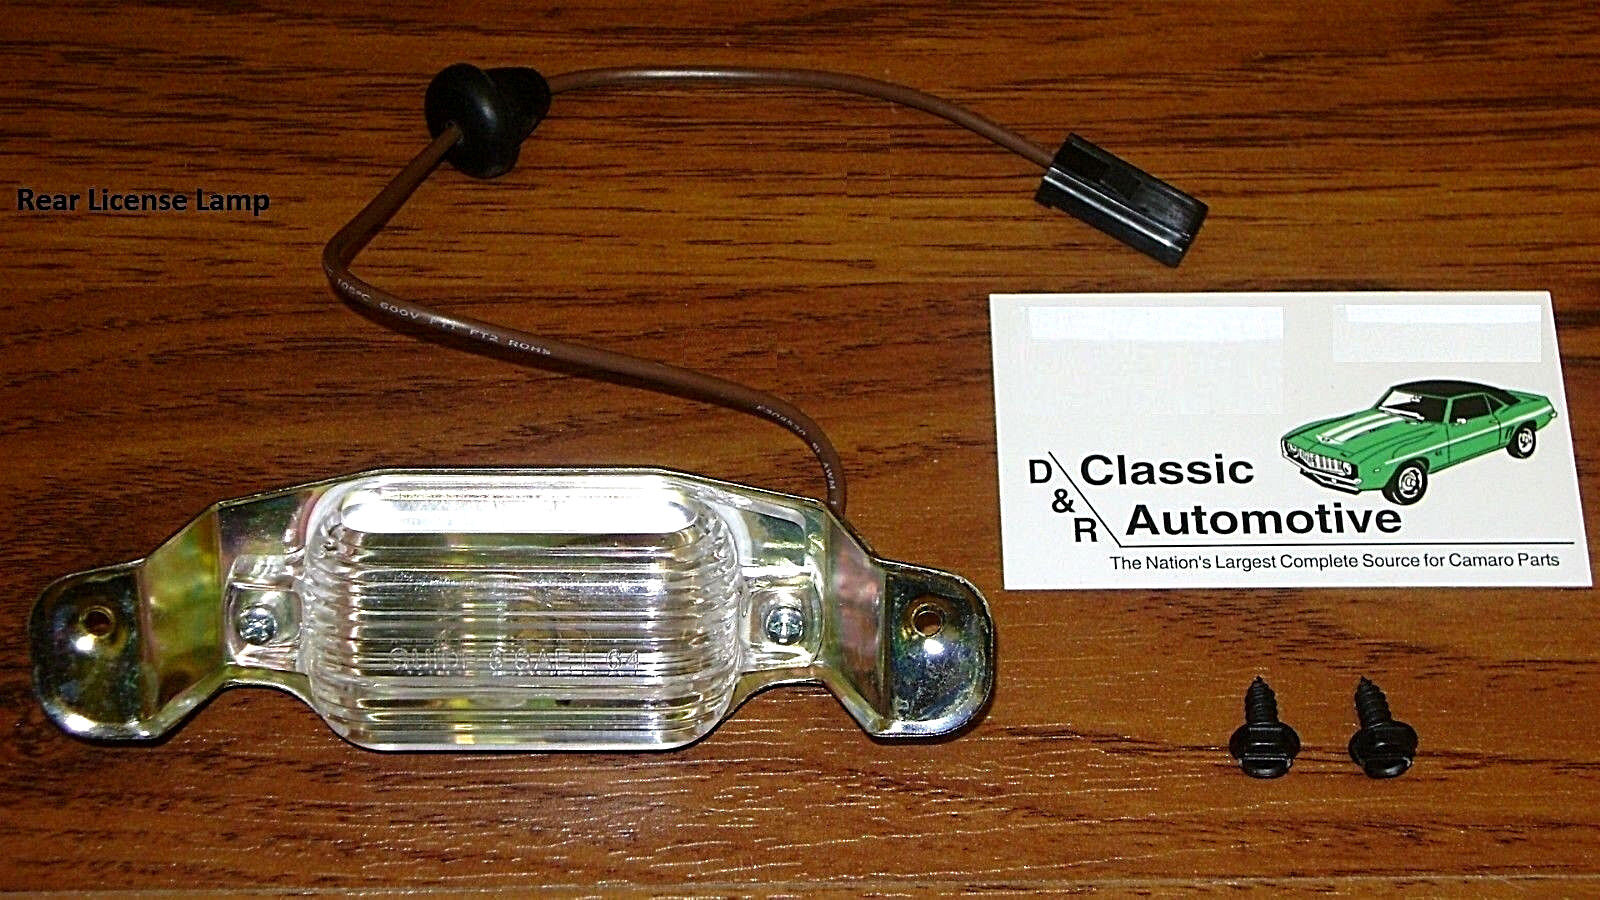 Rear License Light Limited Free shipping anywhere in the nation price Lamp w screws wire+GUIDE Camaro lens Chev brn